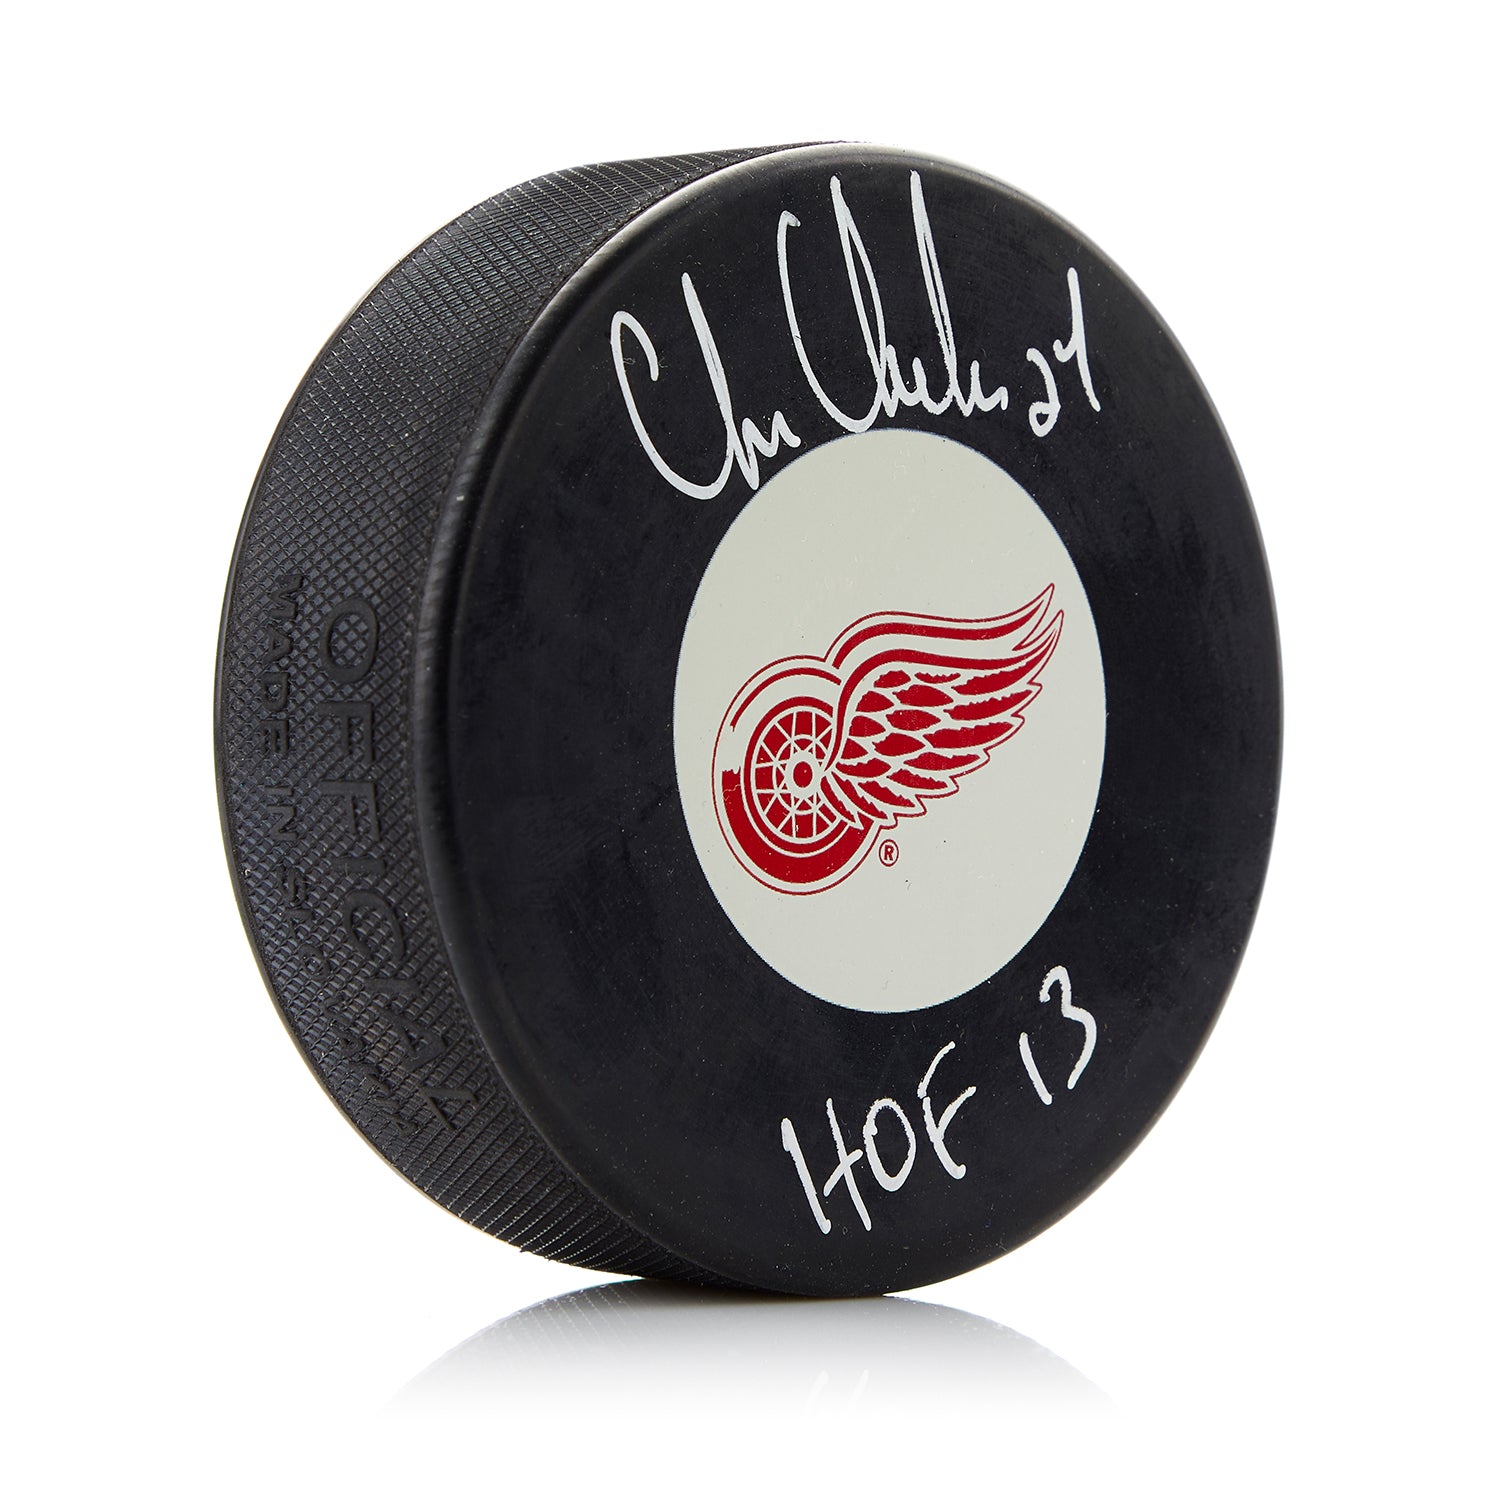 Chris Chelios Detroit Red Wings Autographed Hockey Puck with HOF Note